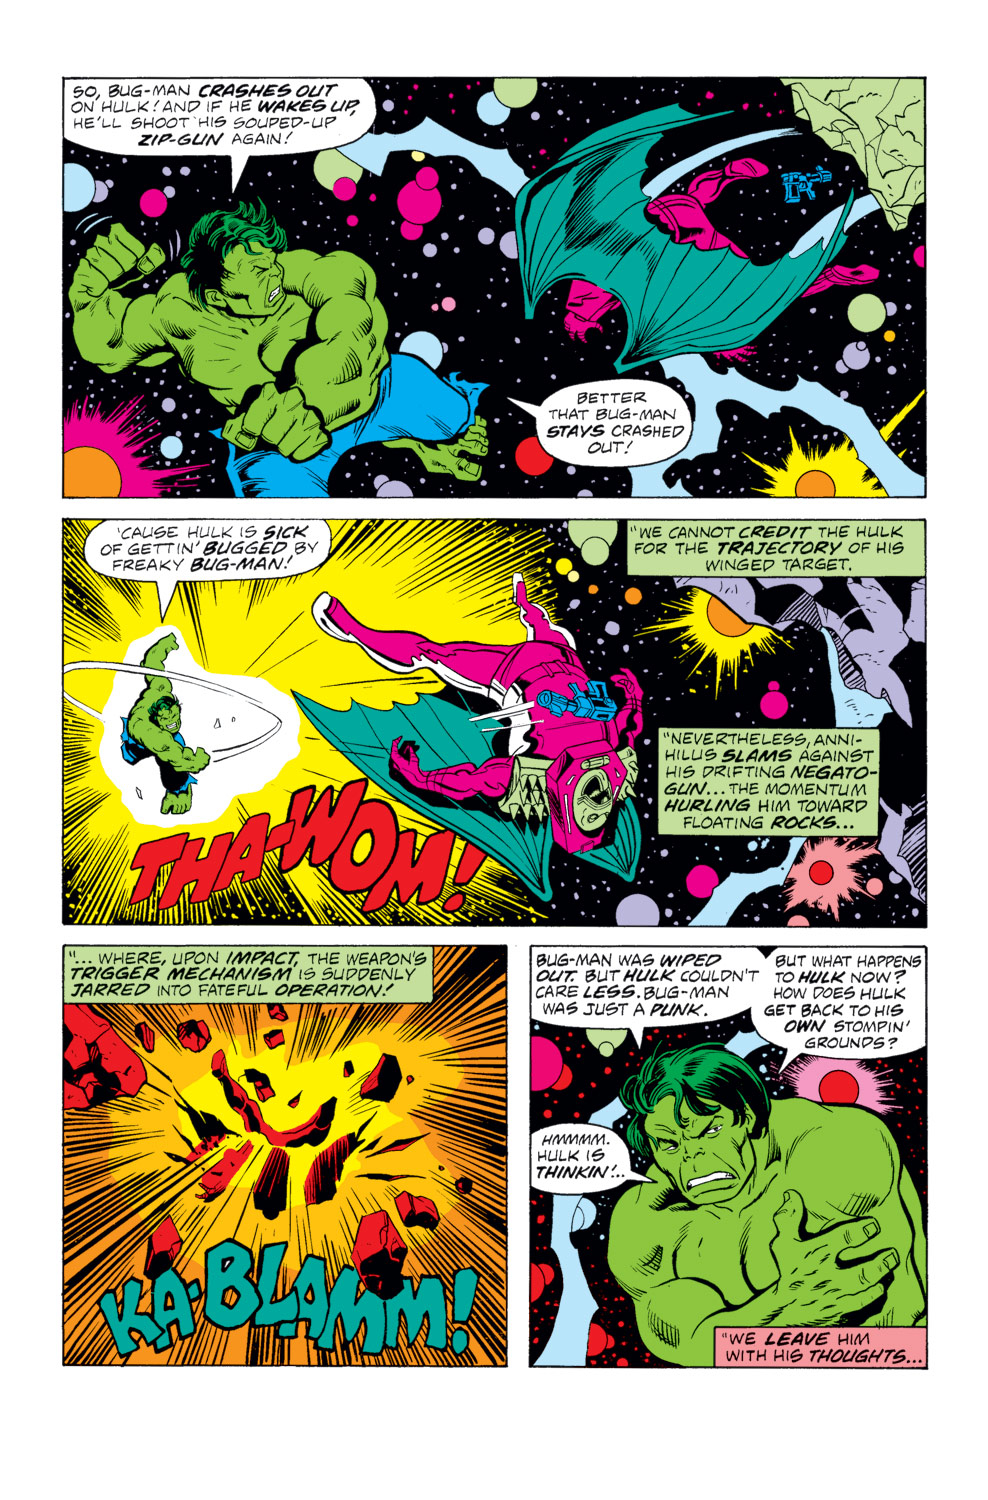 What If? (1977) issue 12 - Rick Jones had become the Hulk - Page 32